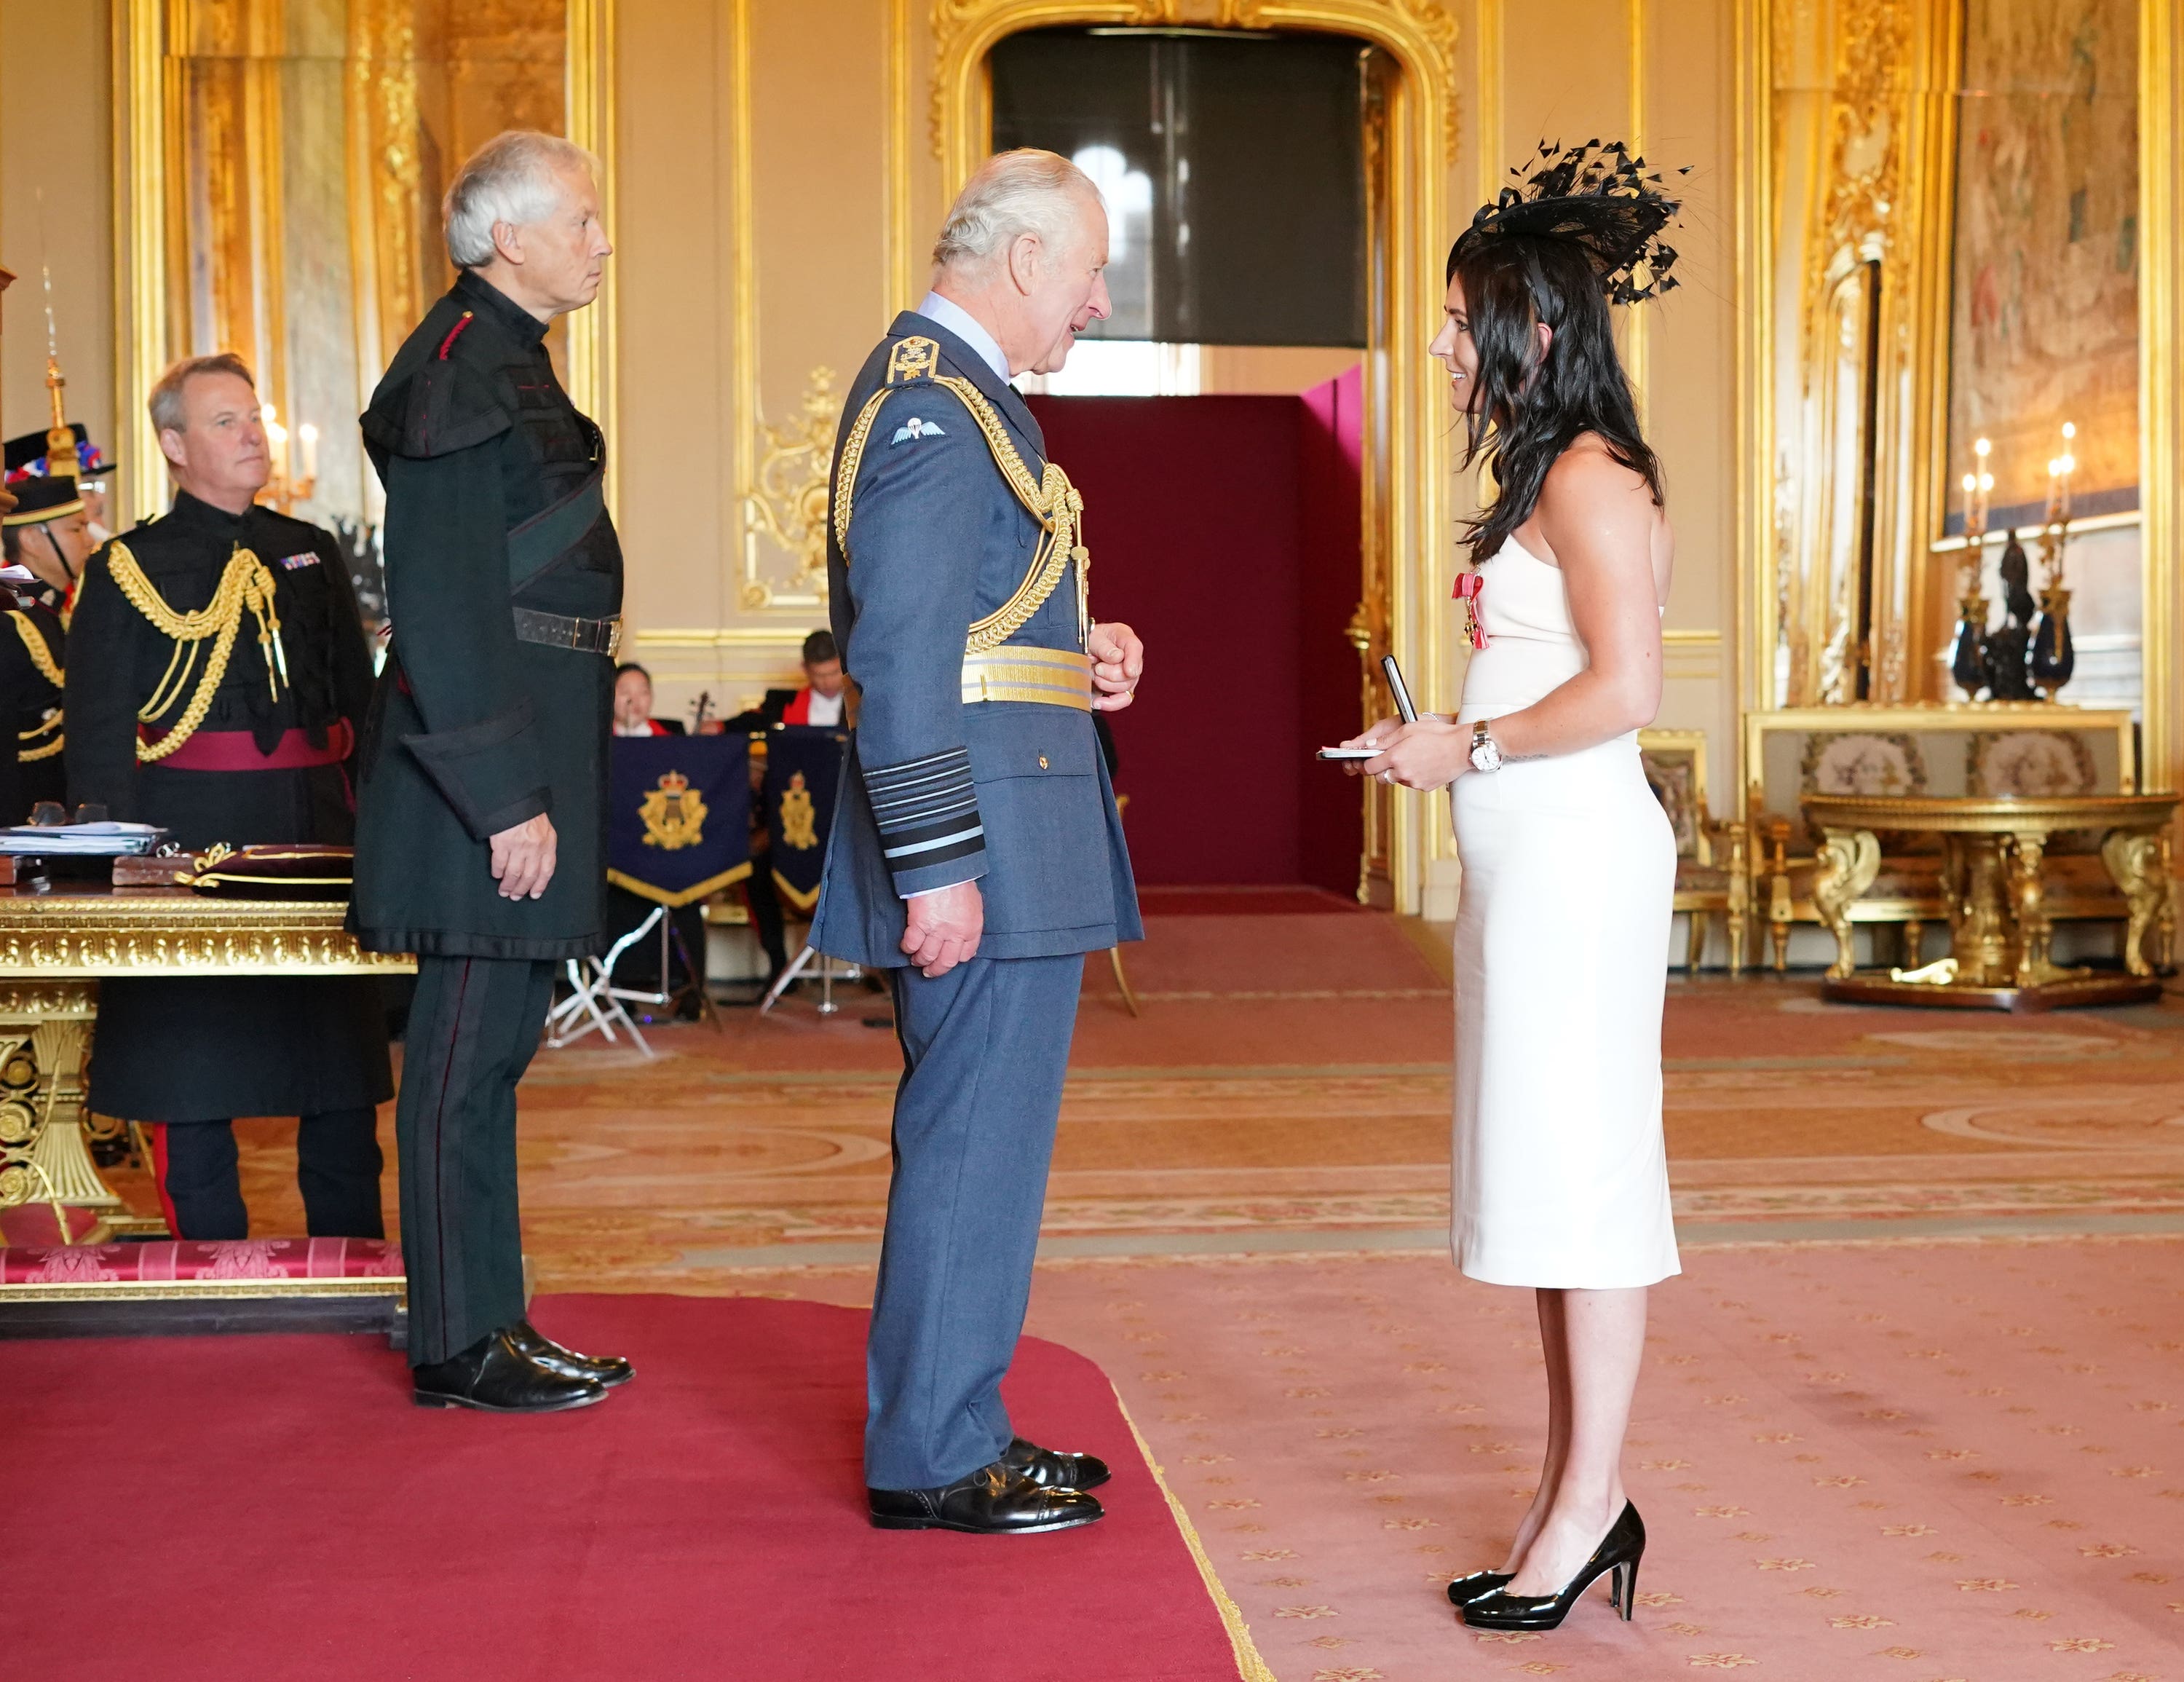 Eve Muirhead is made an MBE and an OBE by the Prince of Wales at Windsor Castle.